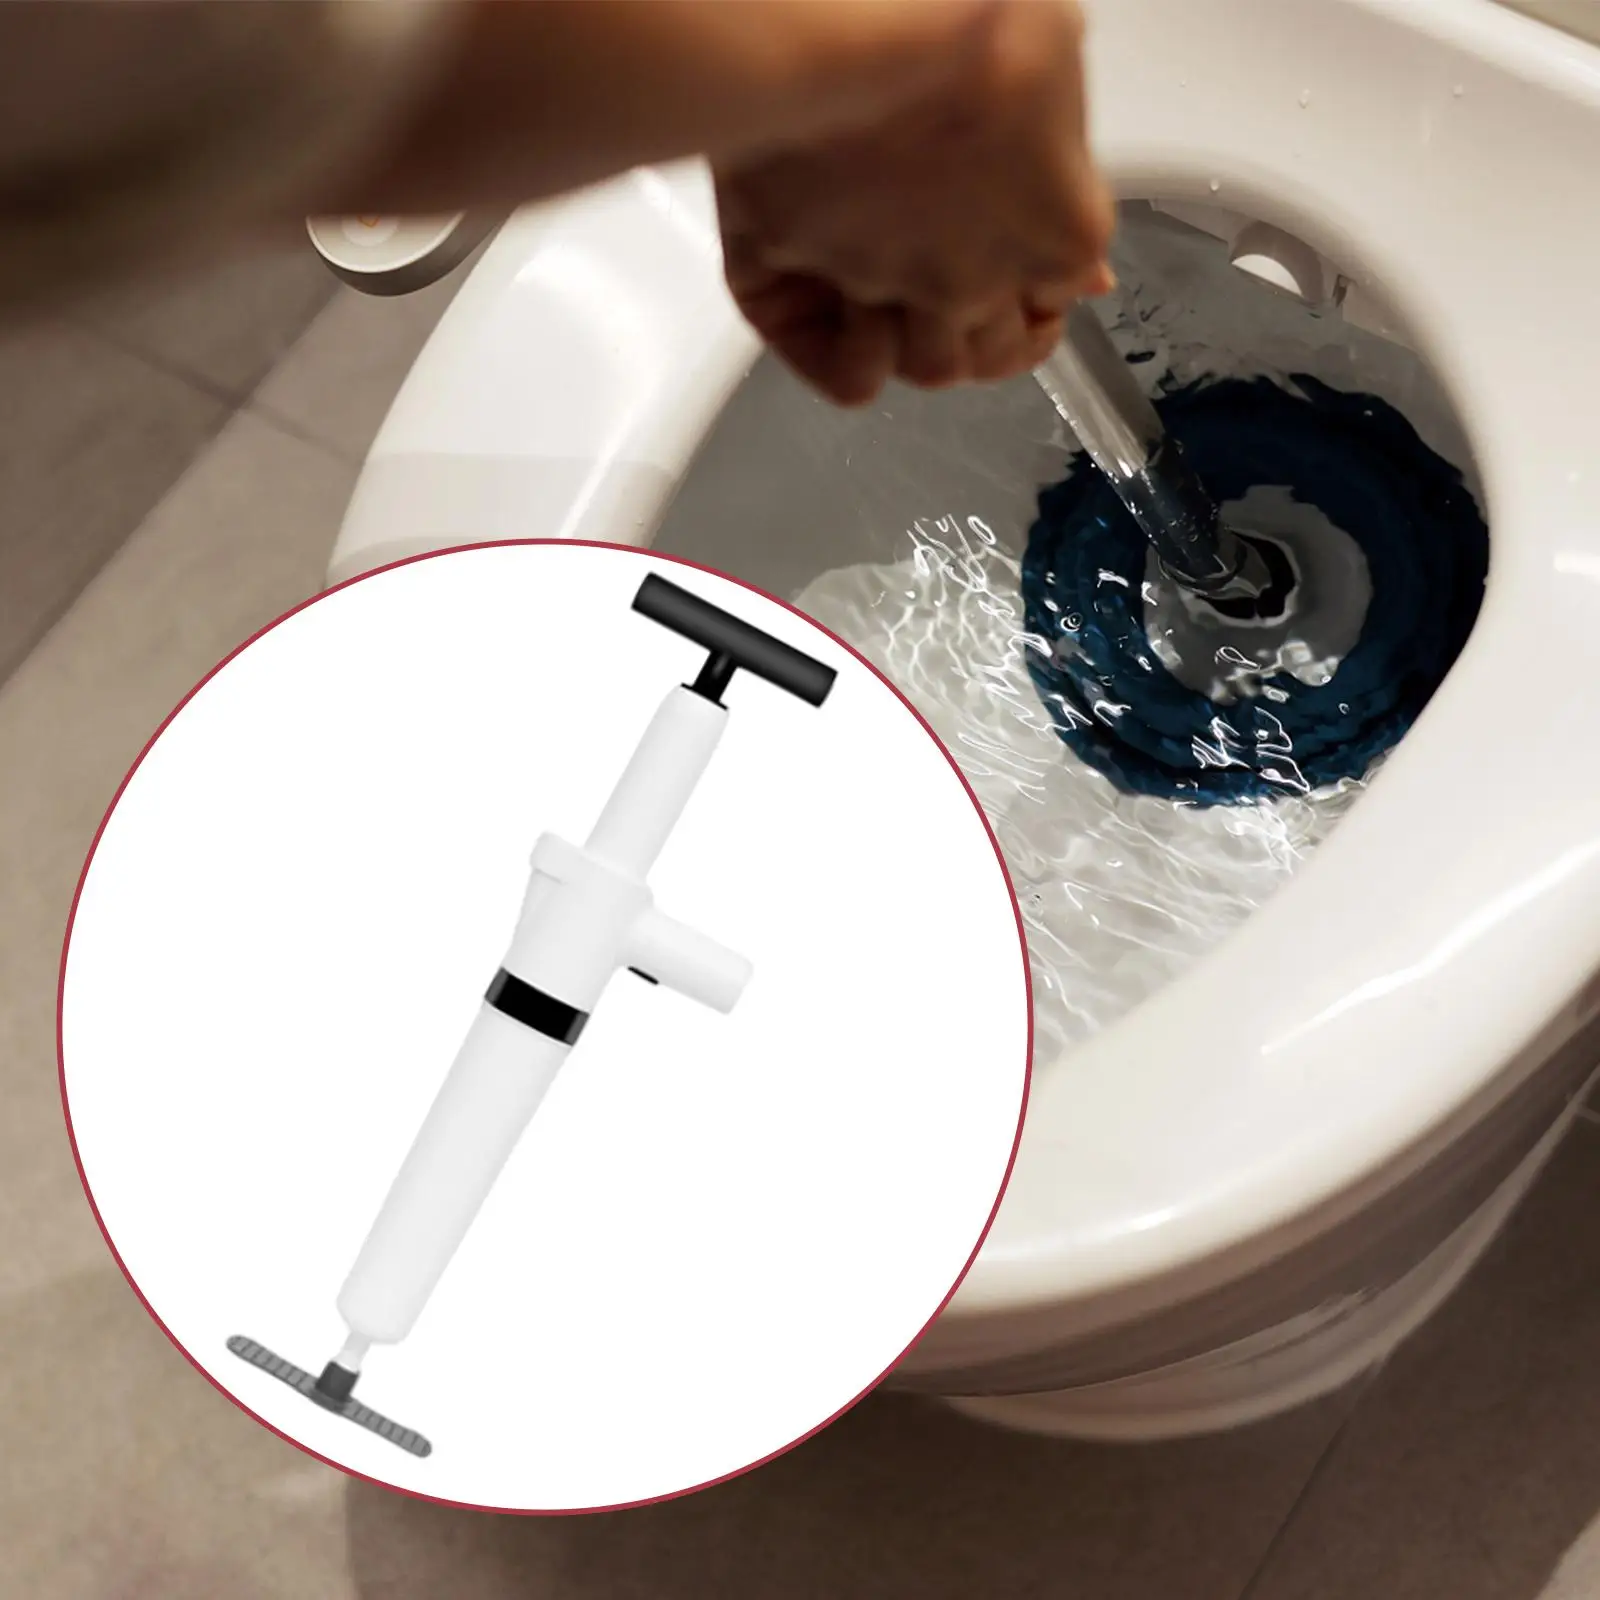 High Pressure Toilet Plunger Air Drain Blaster Clogged Pipe Floor Drain Clog Remover Air Toilet Unclogger for Kitchen Sink Hotel